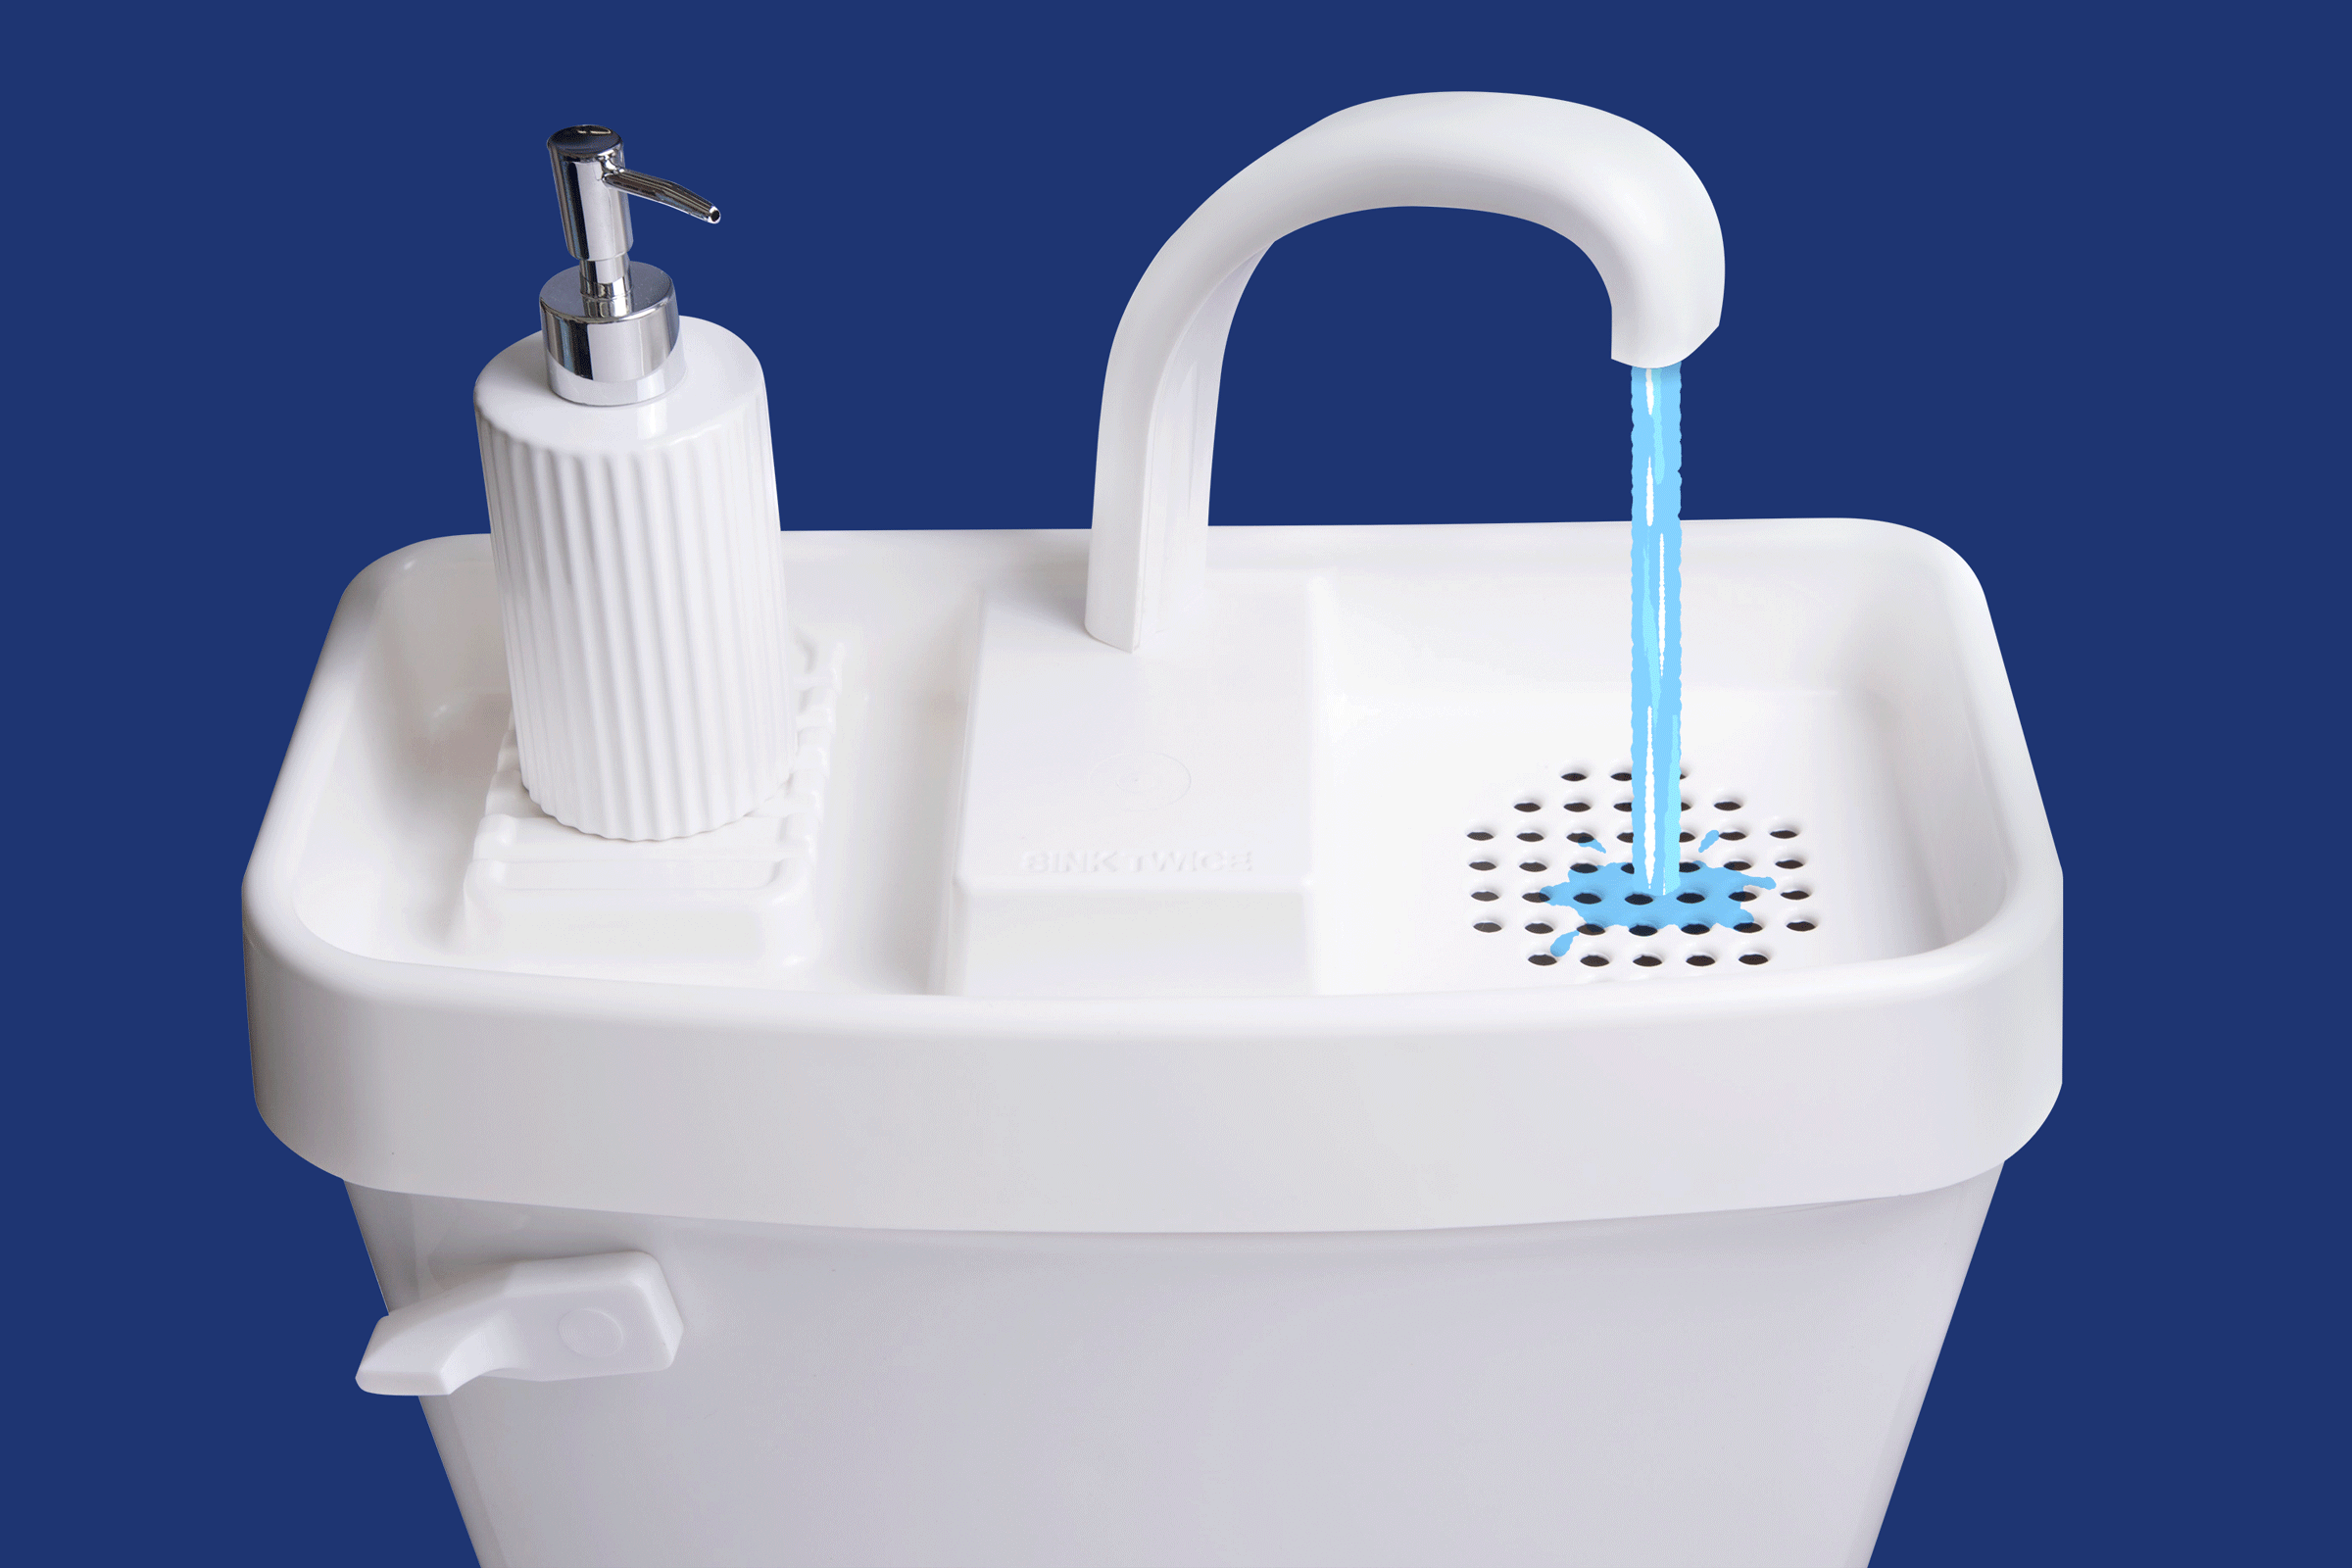 A photo illustration of a toilet with a sink in the upper tank. Animated water is flowing from the faucet.